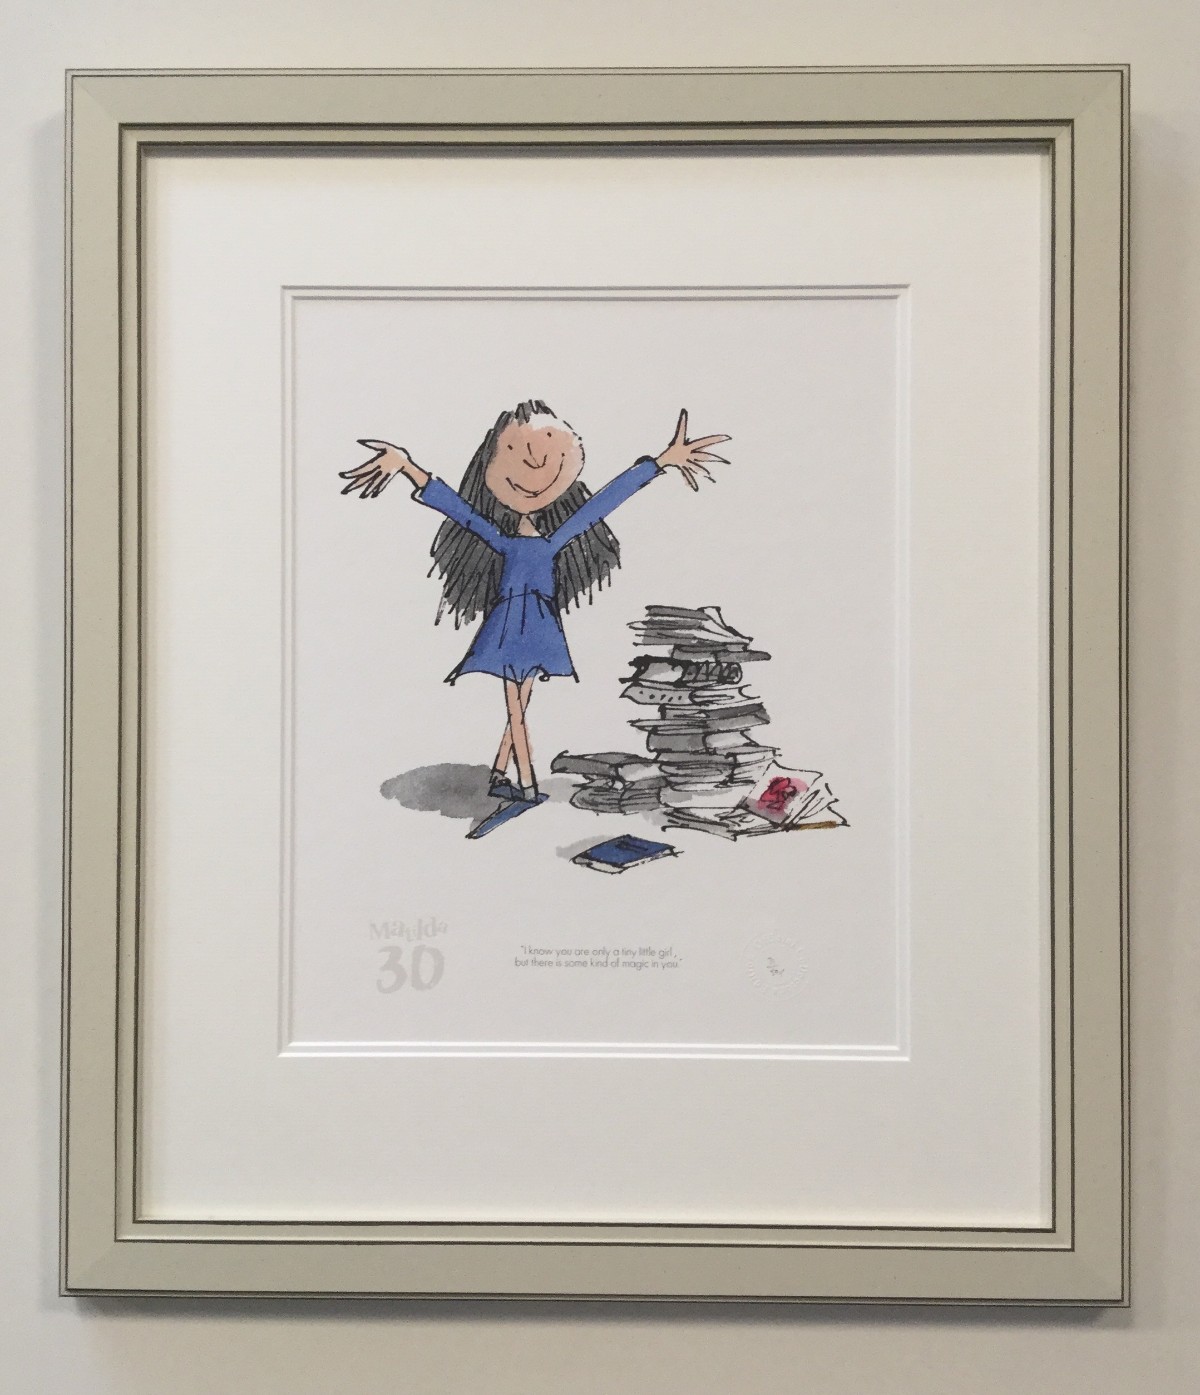 Matilda 30th - A Kind of Magic in You by Quentin Blake